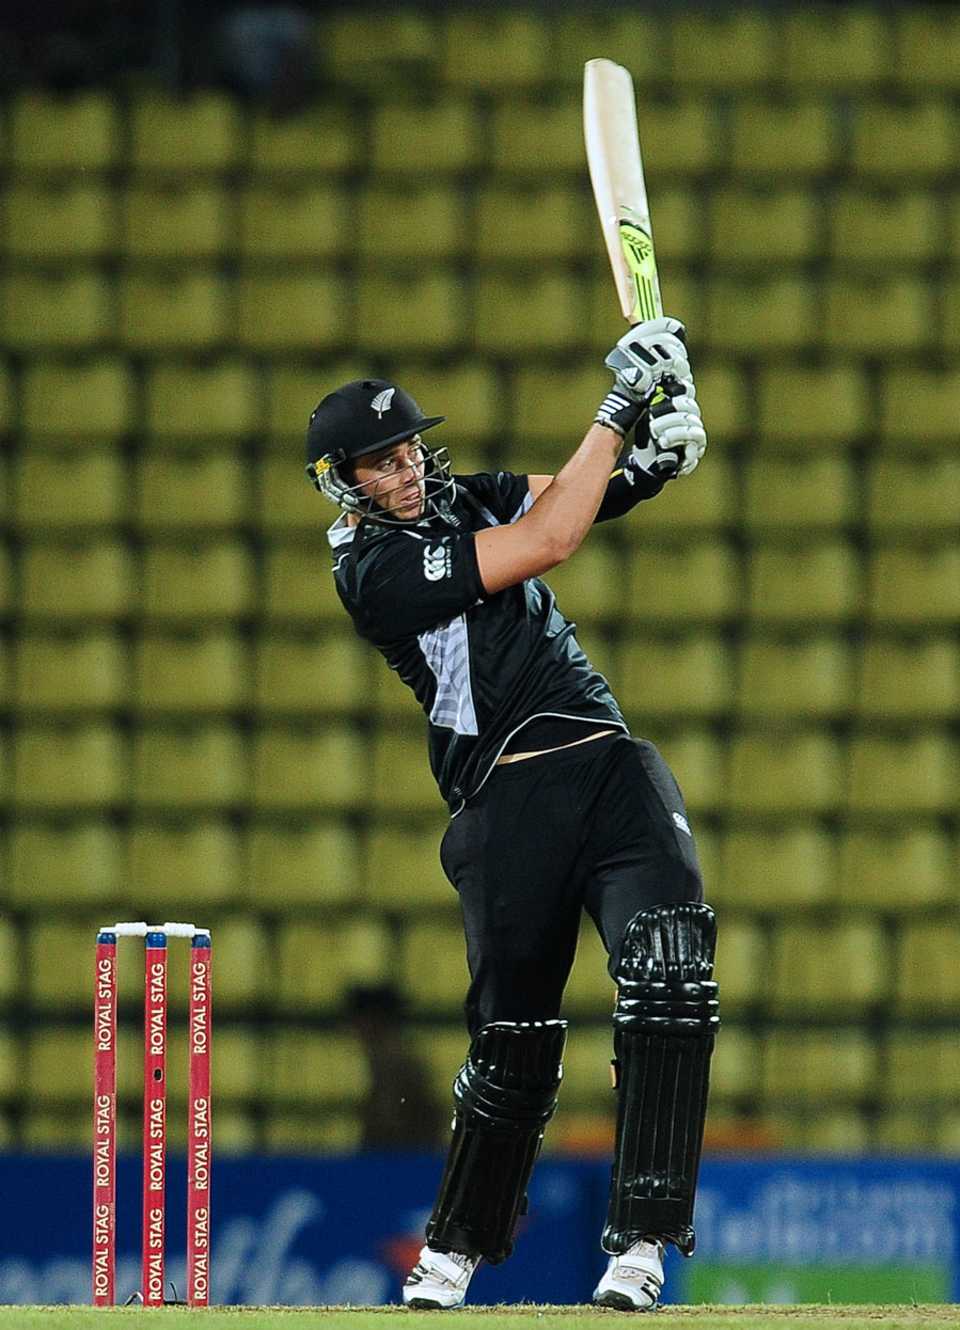 Tim Southee got some quick runs towards the end of the innings